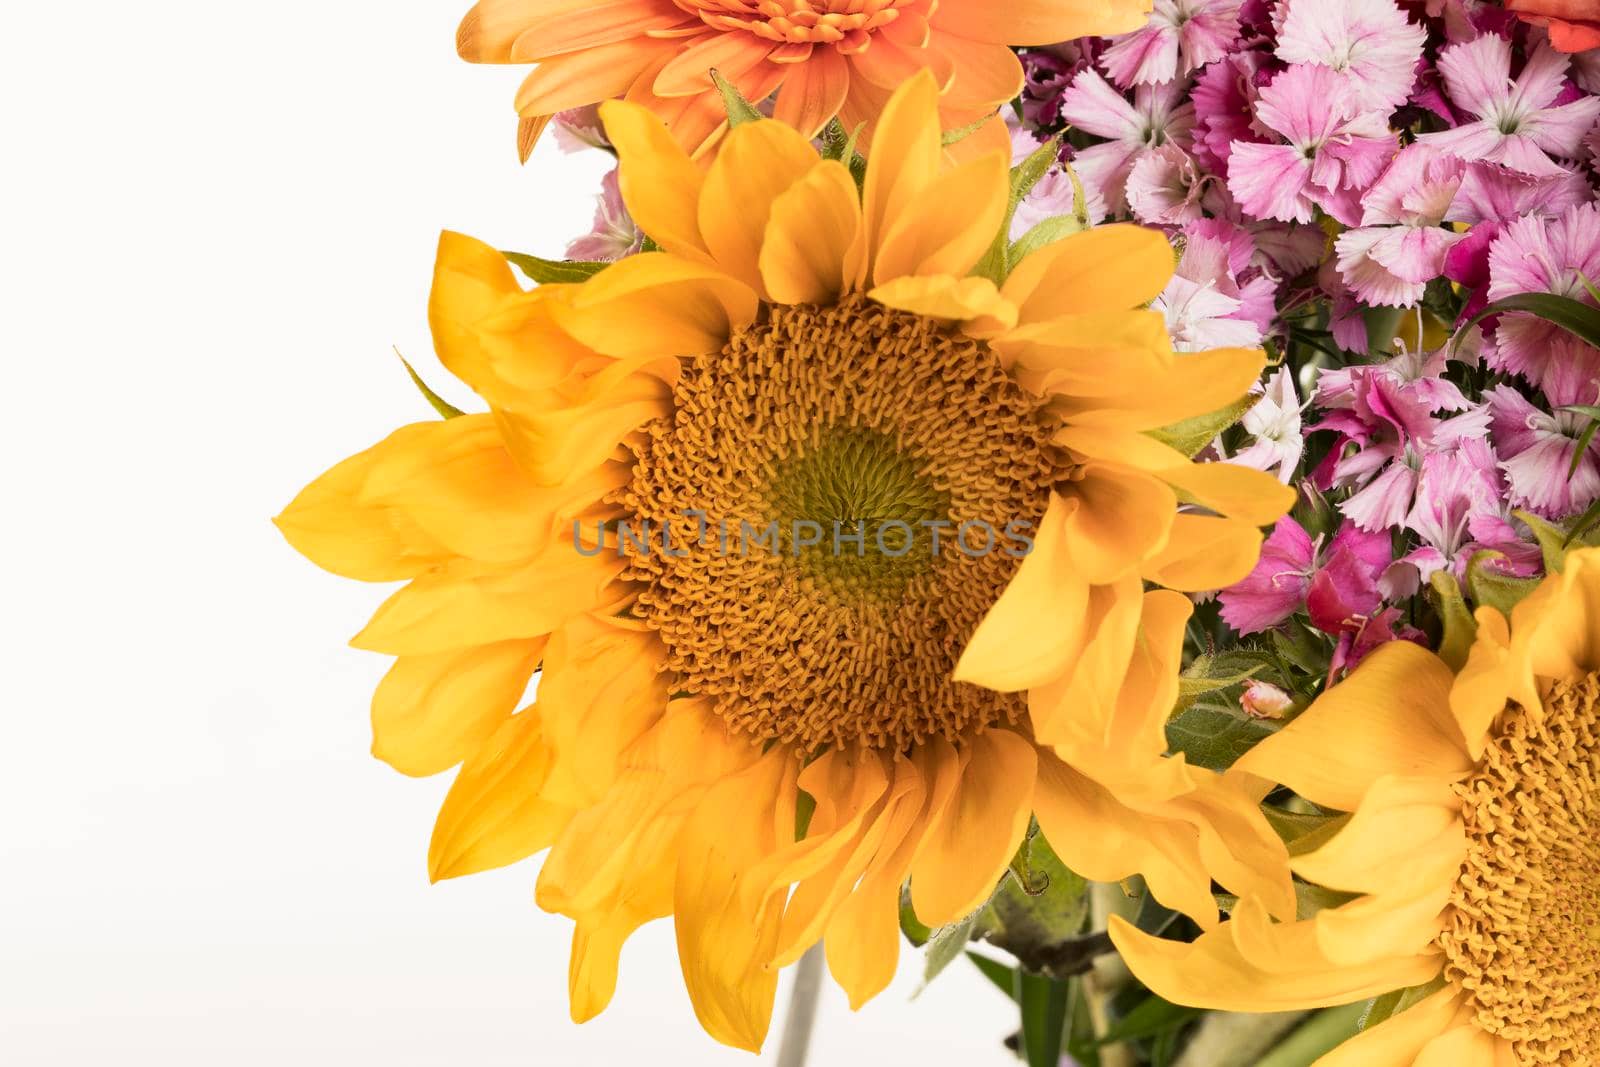 Sunflower in bouquet isolated on white background.